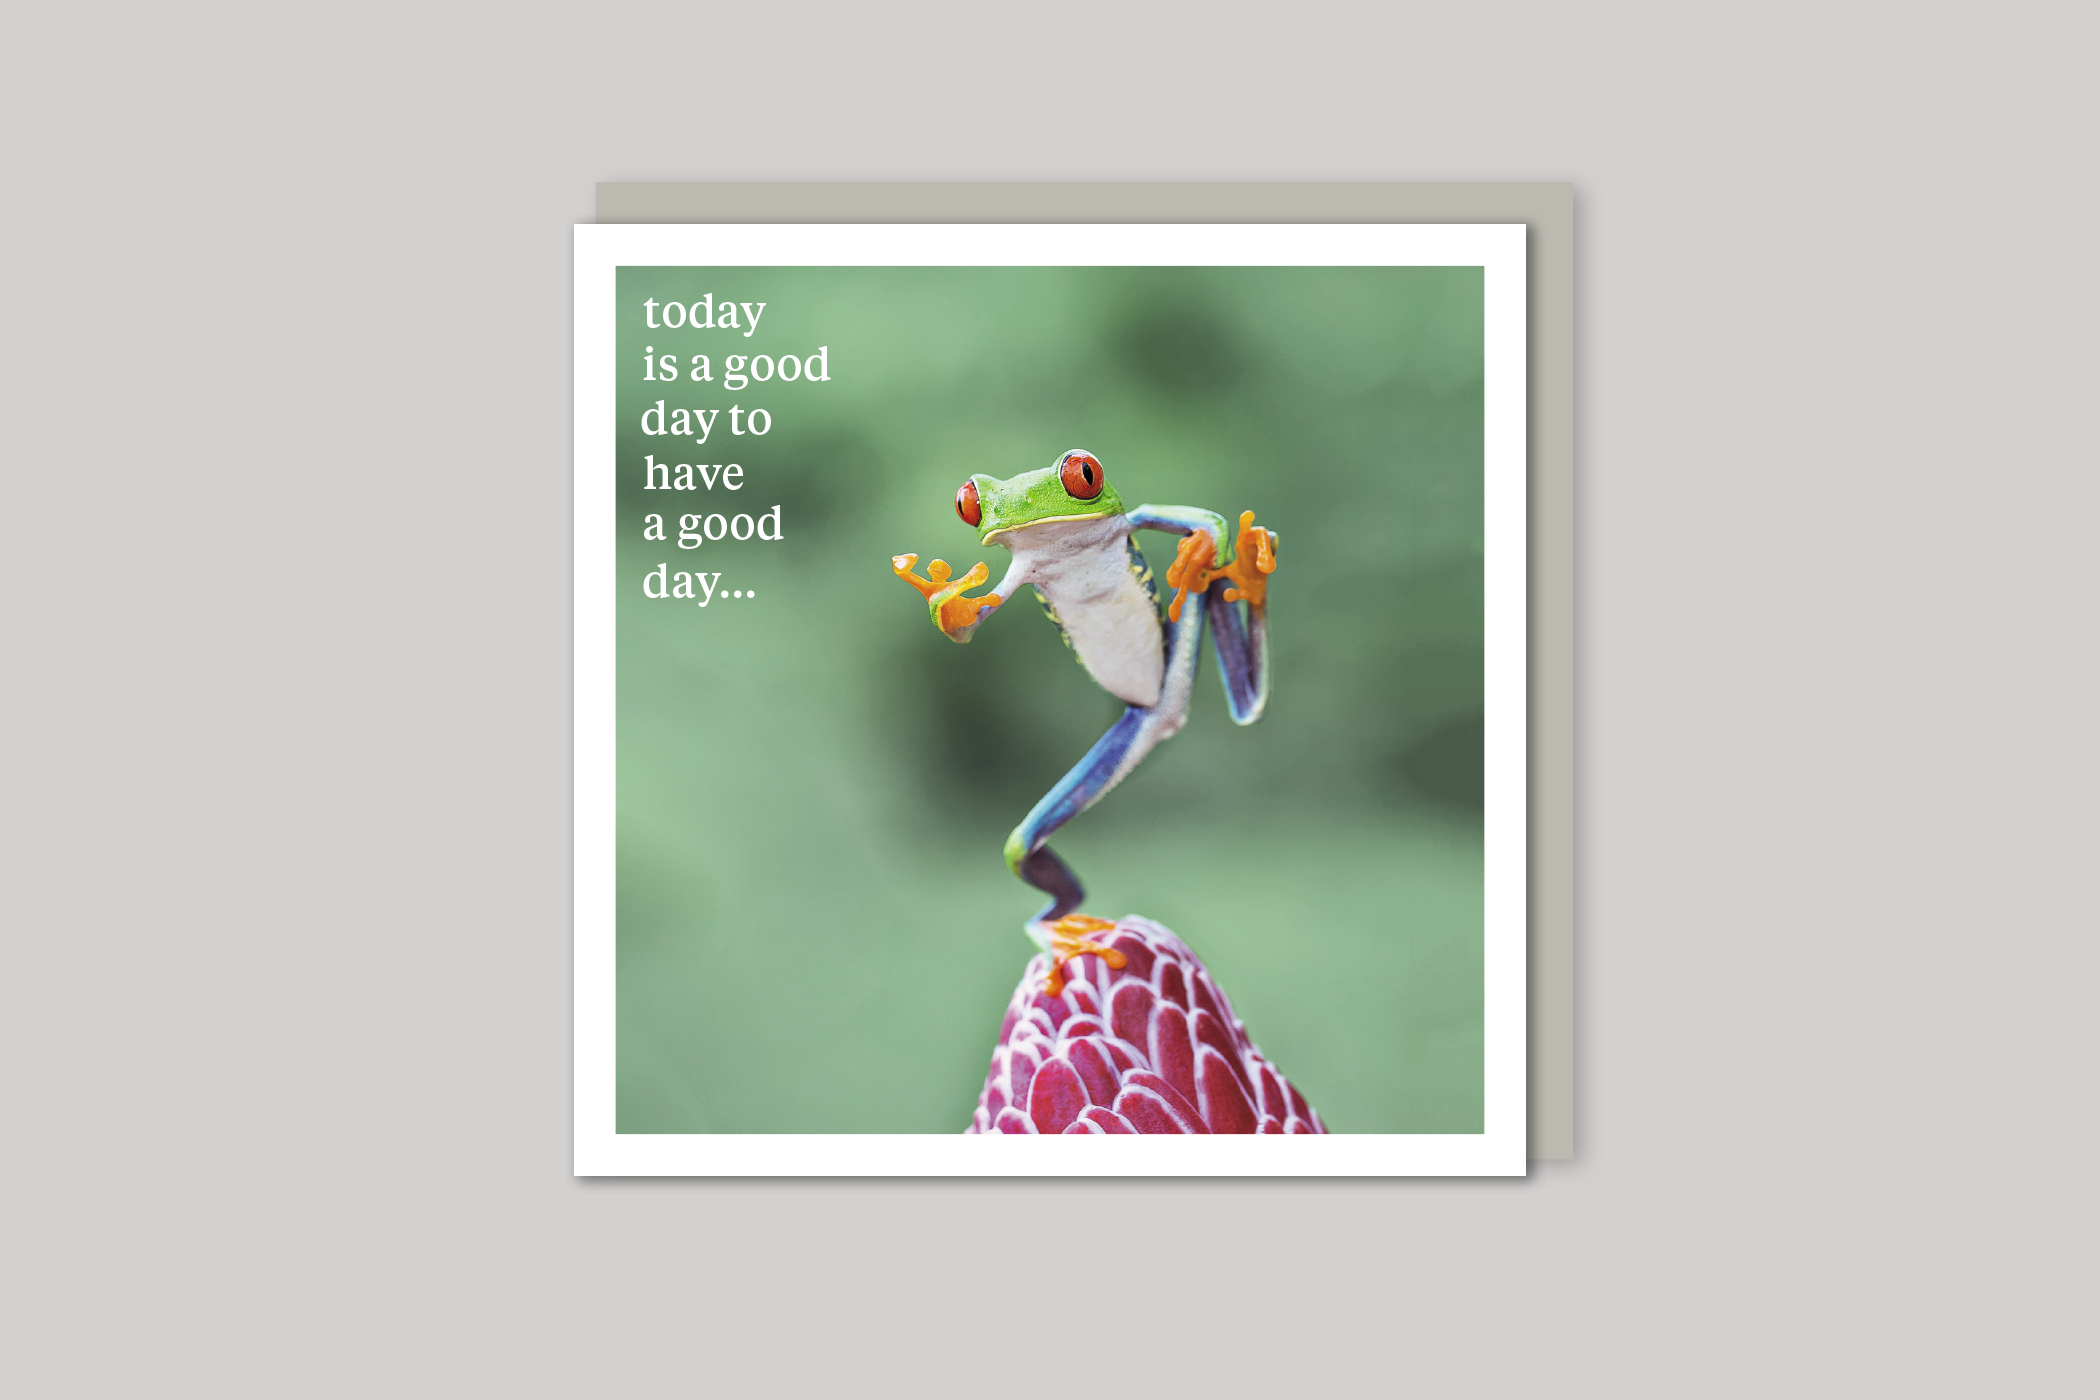 Have A Good Day quirky animal portrait from Curious World range of greeting cards by Icon, back page.